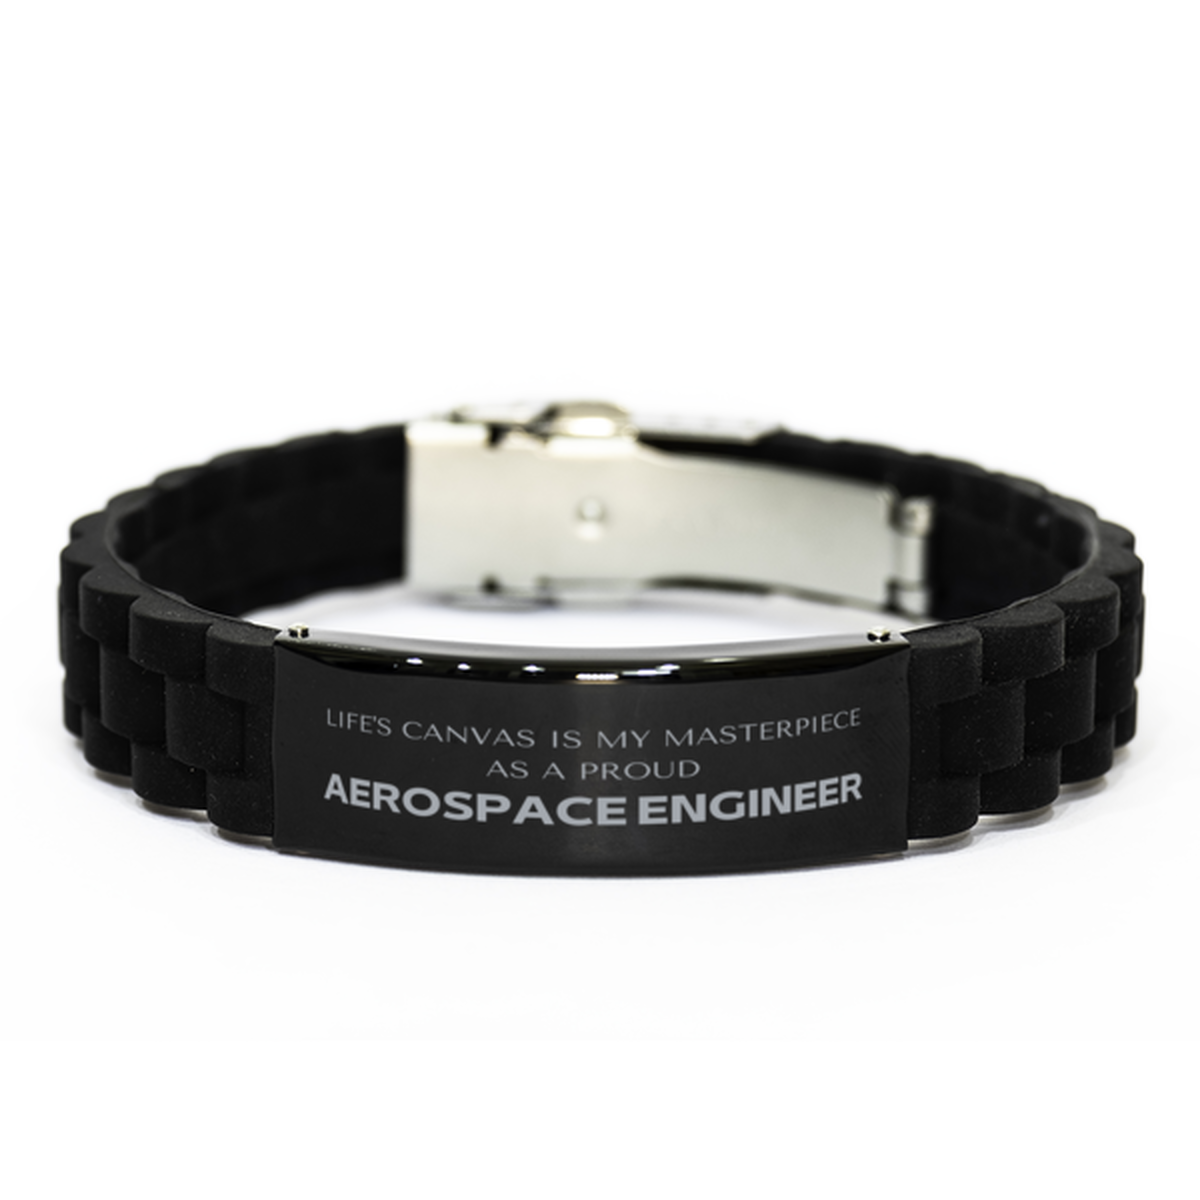 Proud Aerospace Engineer Gifts, Life's canvas is my masterpiece, Epic Birthday Christmas Unique Black Glidelock Clasp Bracelet For Aerospace Engineer, Coworkers, Men, Women, Friends